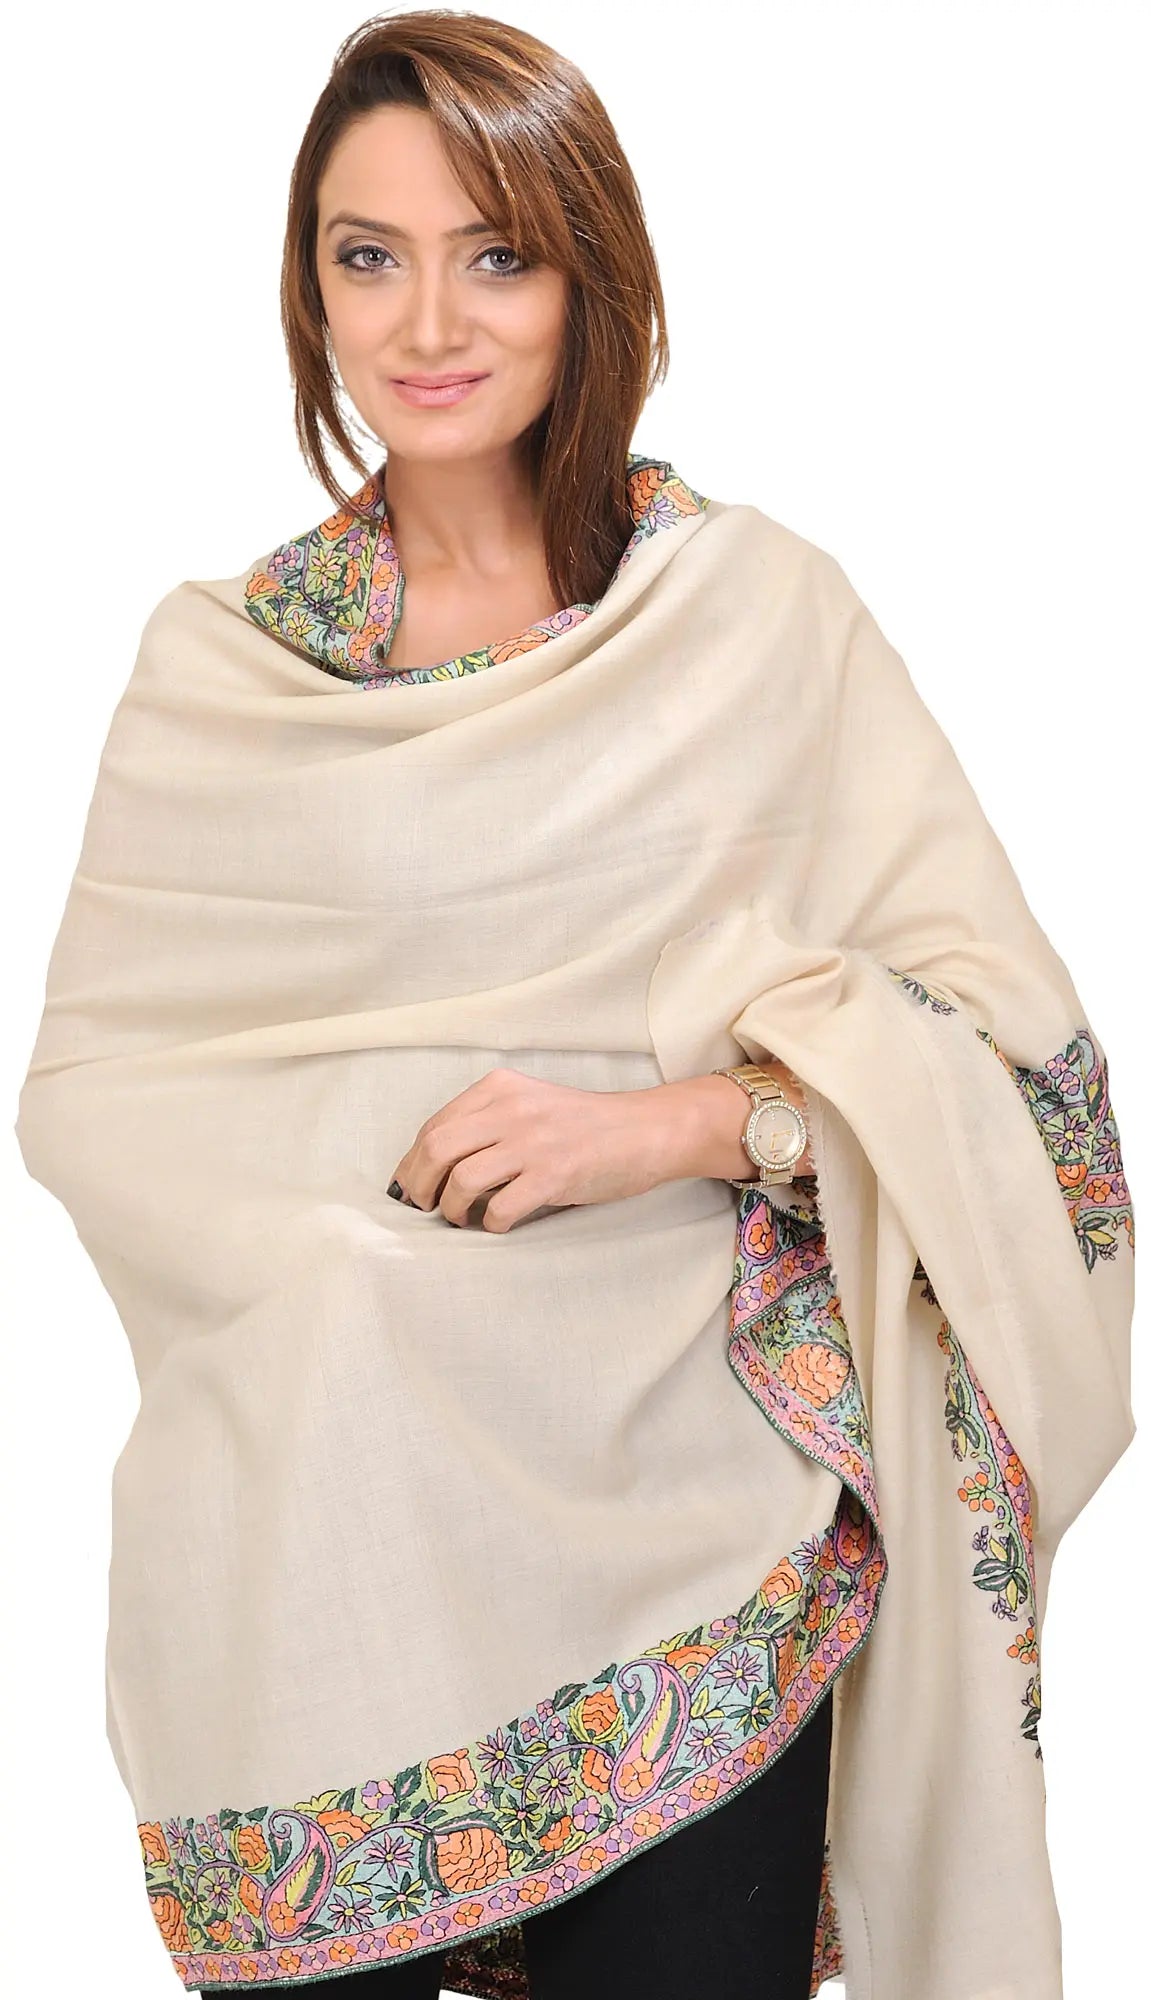 Winter-White Plain Pashmina Shawl with Intricate Hand-Embroidery Flowers on Border